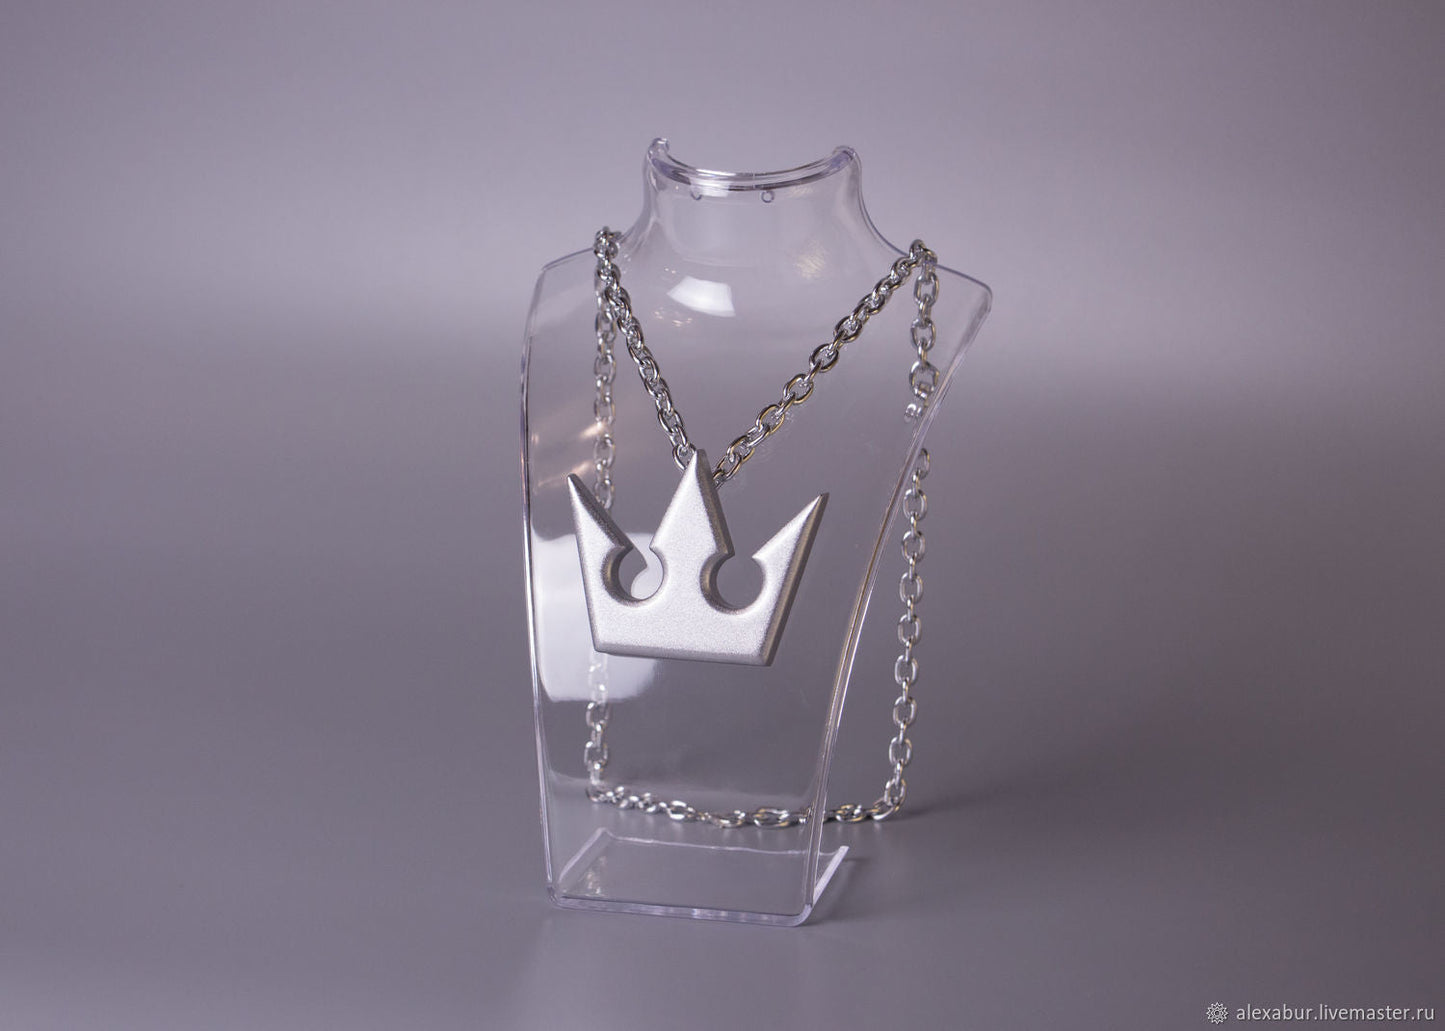 Kingdom Hearts inspired Sora Necklace | 3D printed Replica | kh3 | 3D printed Cosplay Props | Video Game Character